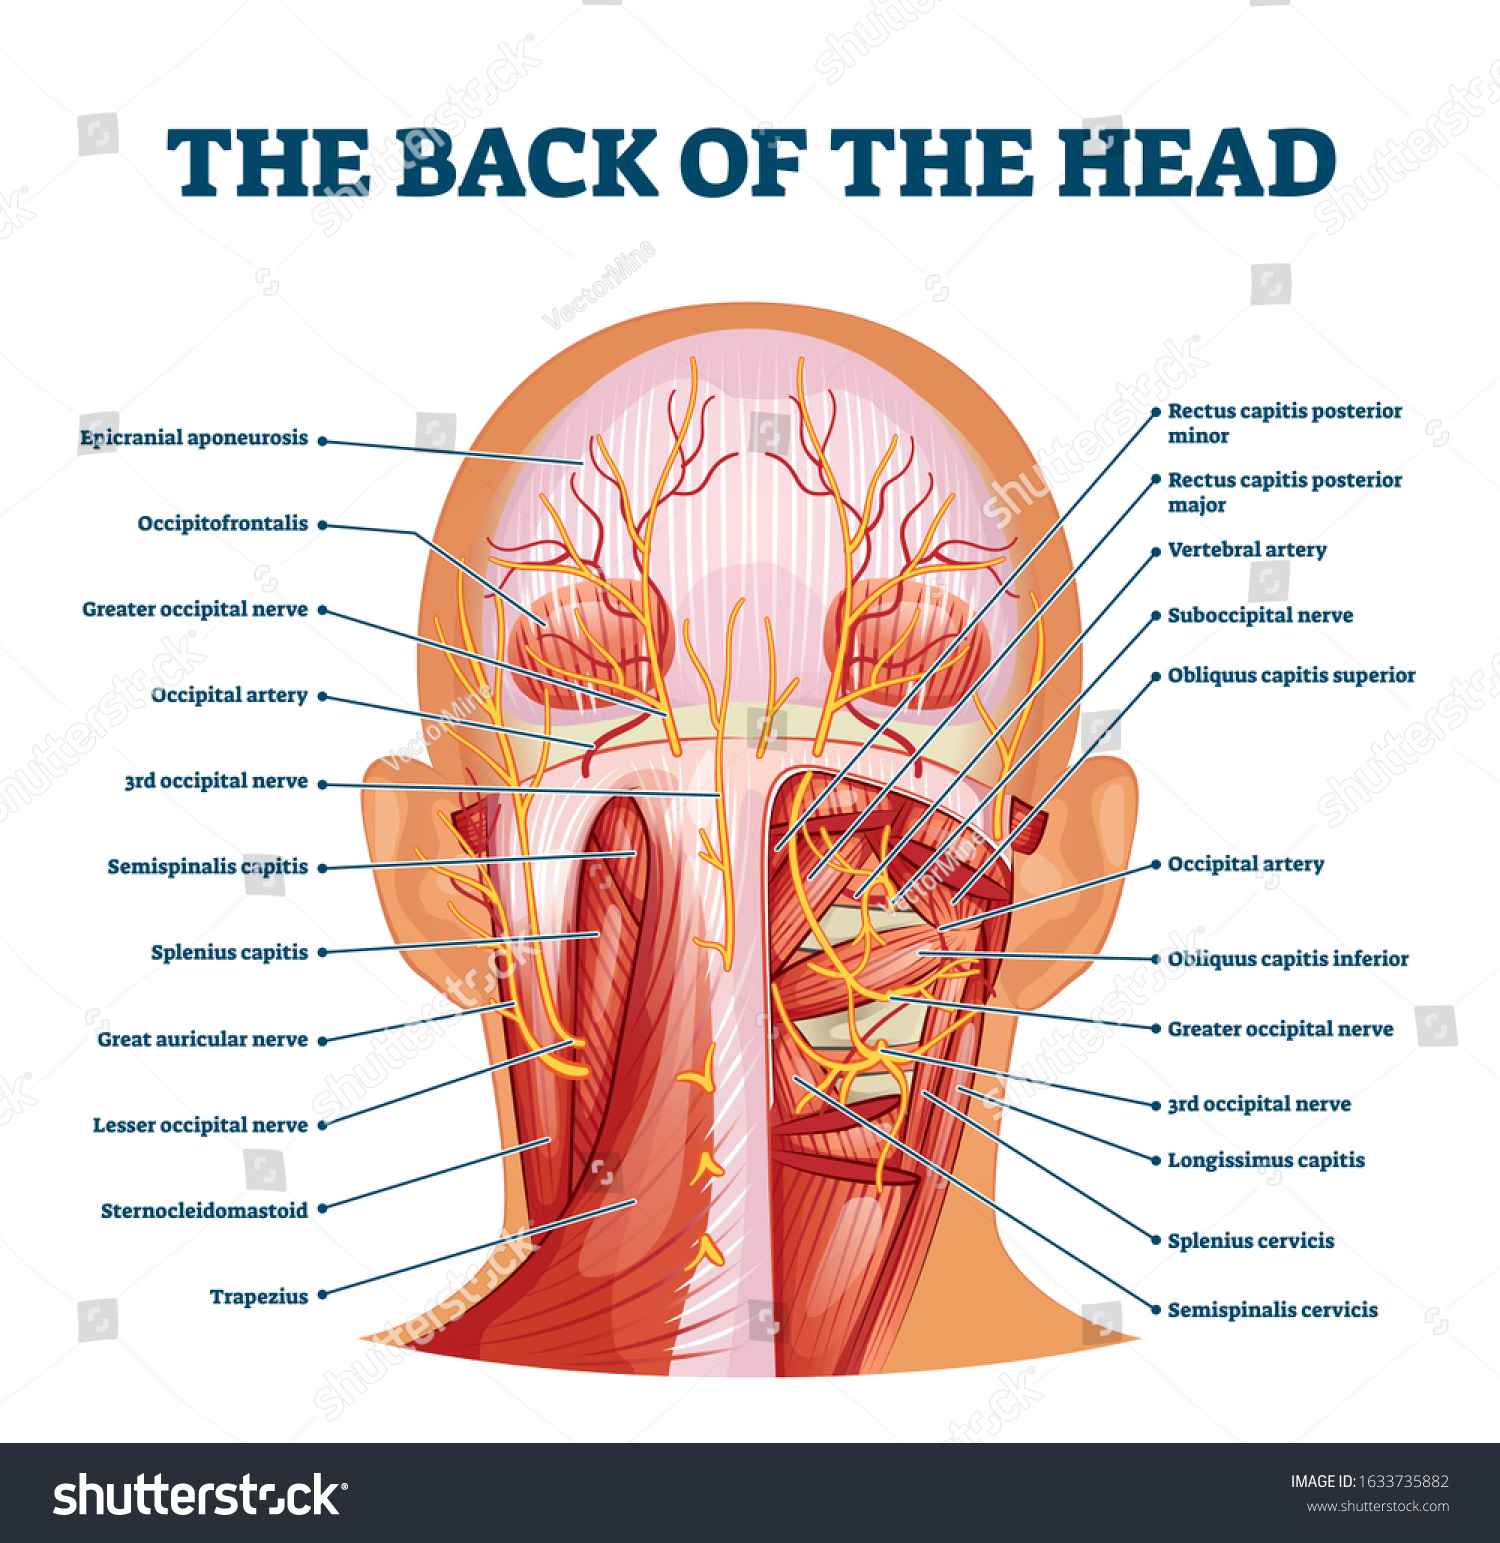 Back Head Muscle Structure Nerve System Stock Vector Royalty Free 1633735882 Shutterstock 3714